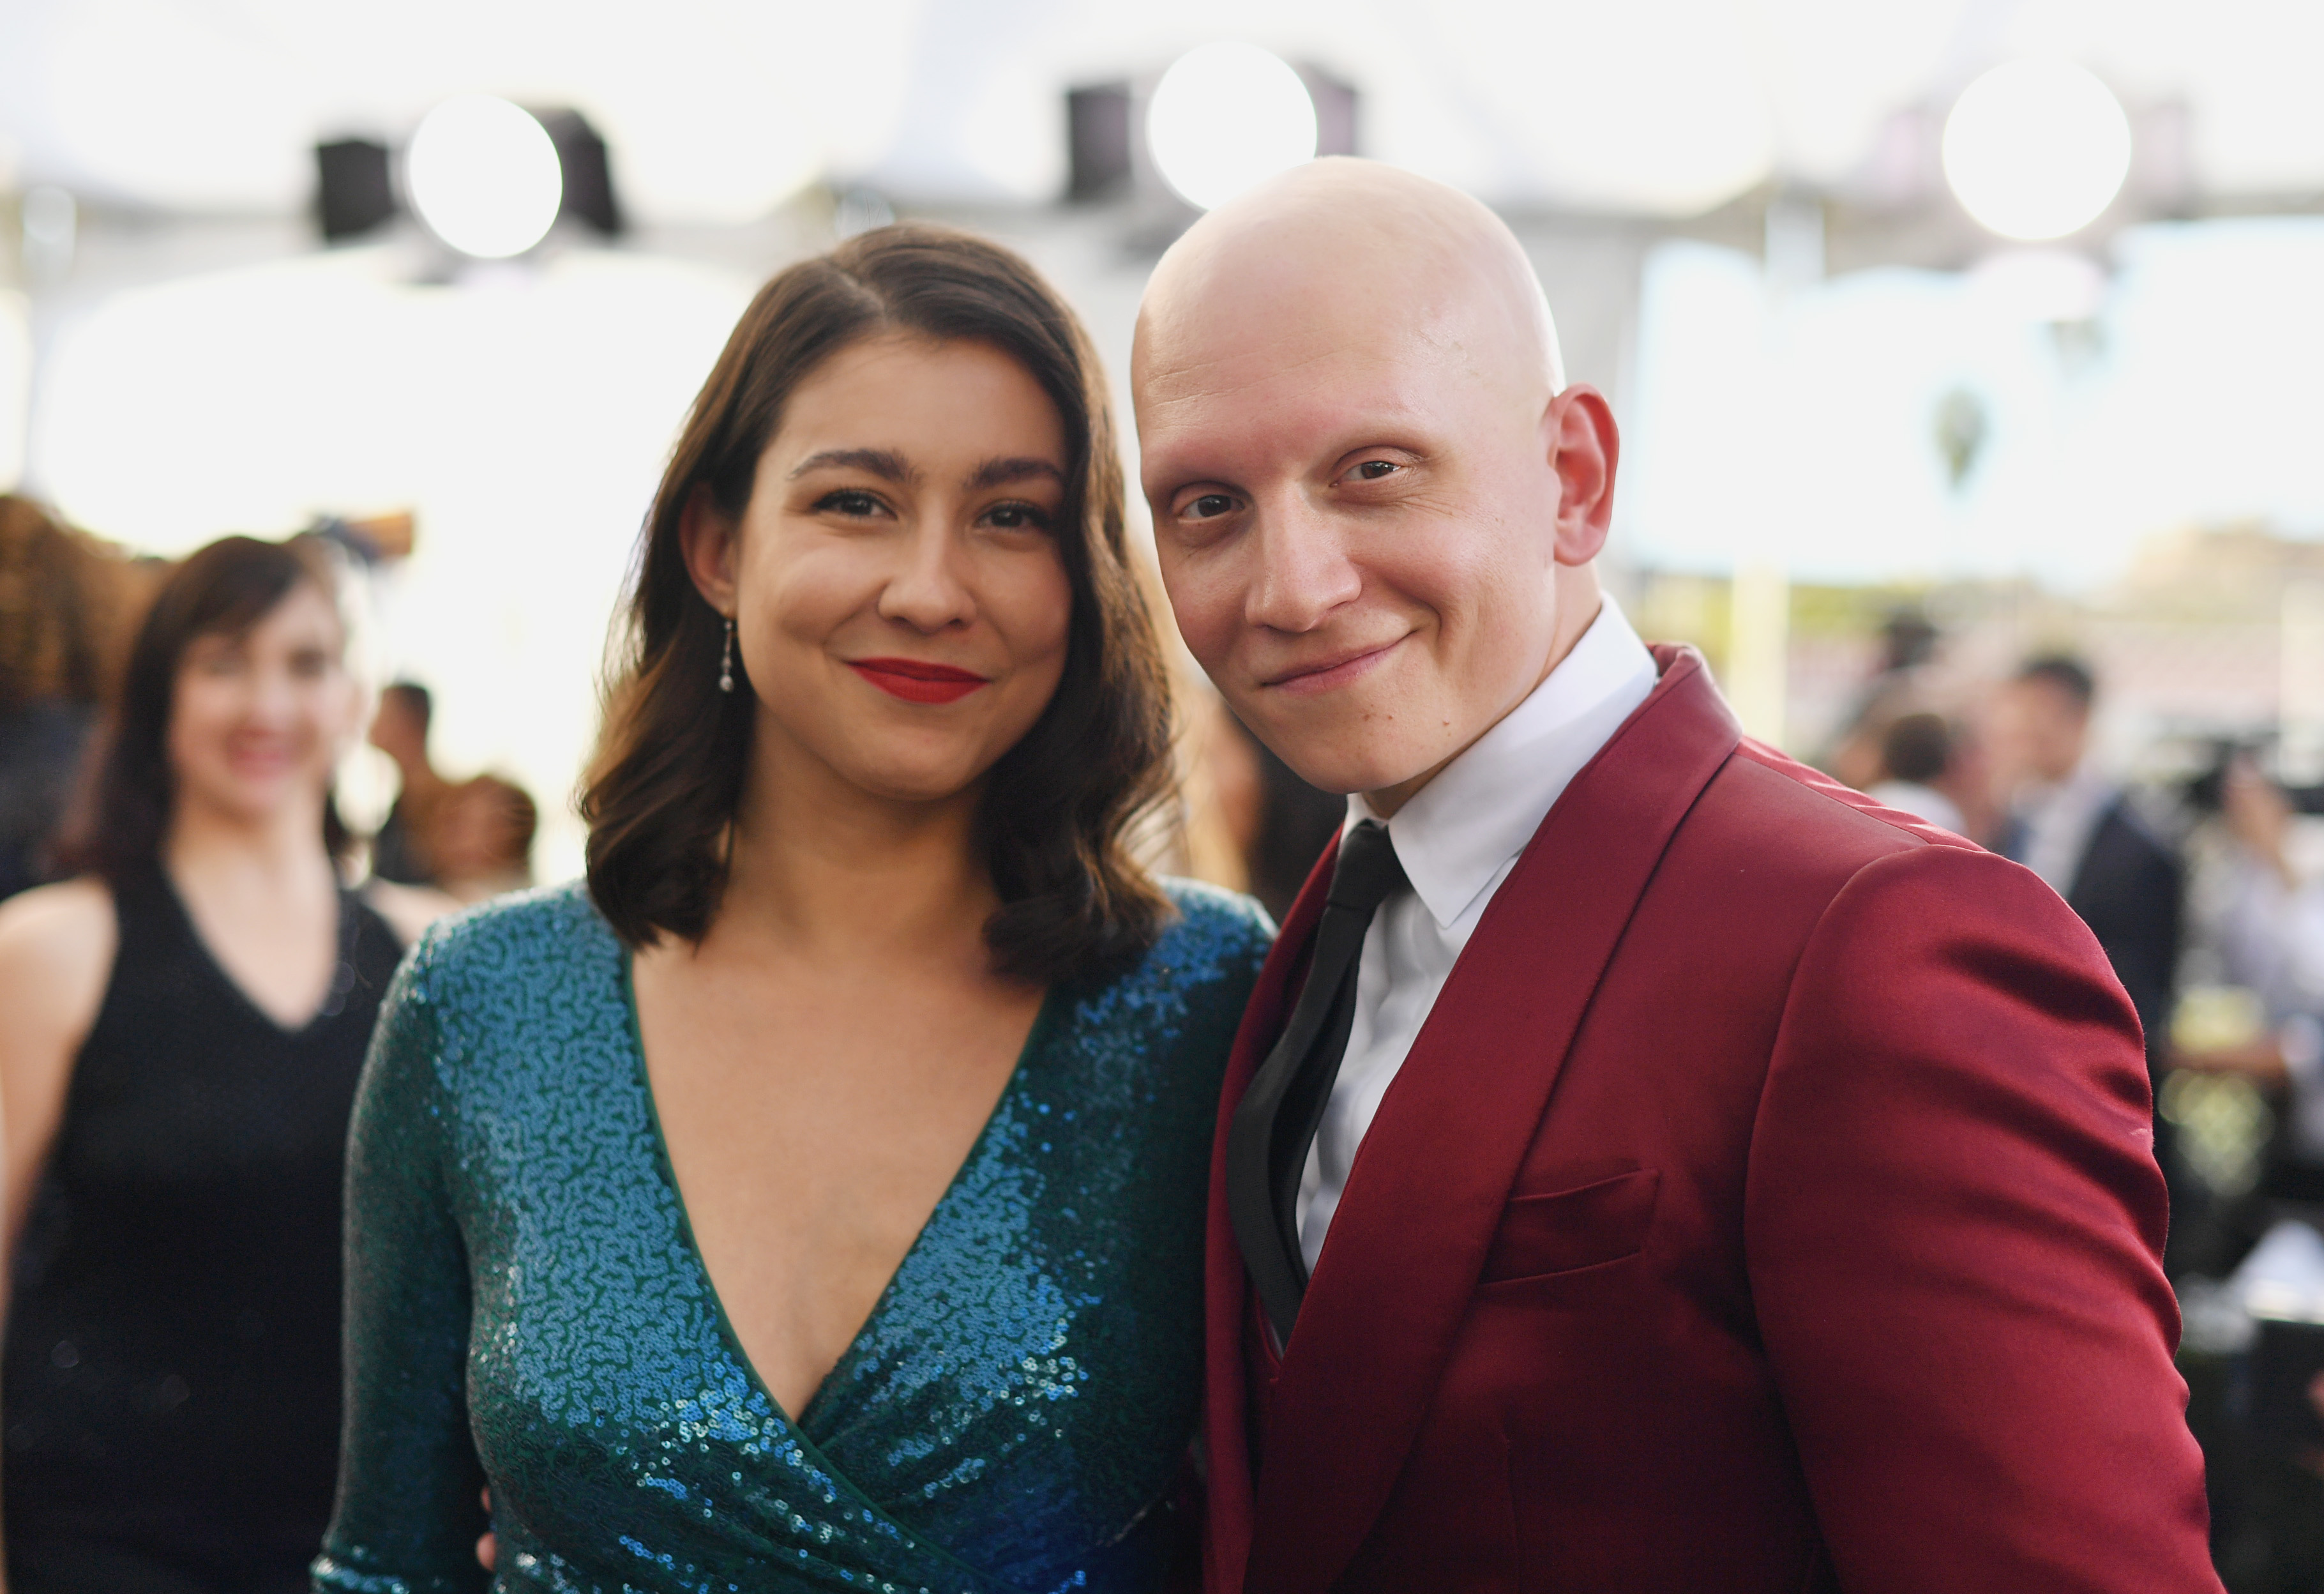 Gia Olimp and Anthony Carrigan at the 25th Annual Screen Actors Guild Awards at The Shrine Auditorium on January 27, 2019 in Los Angeles, California. | Source: Getty Images